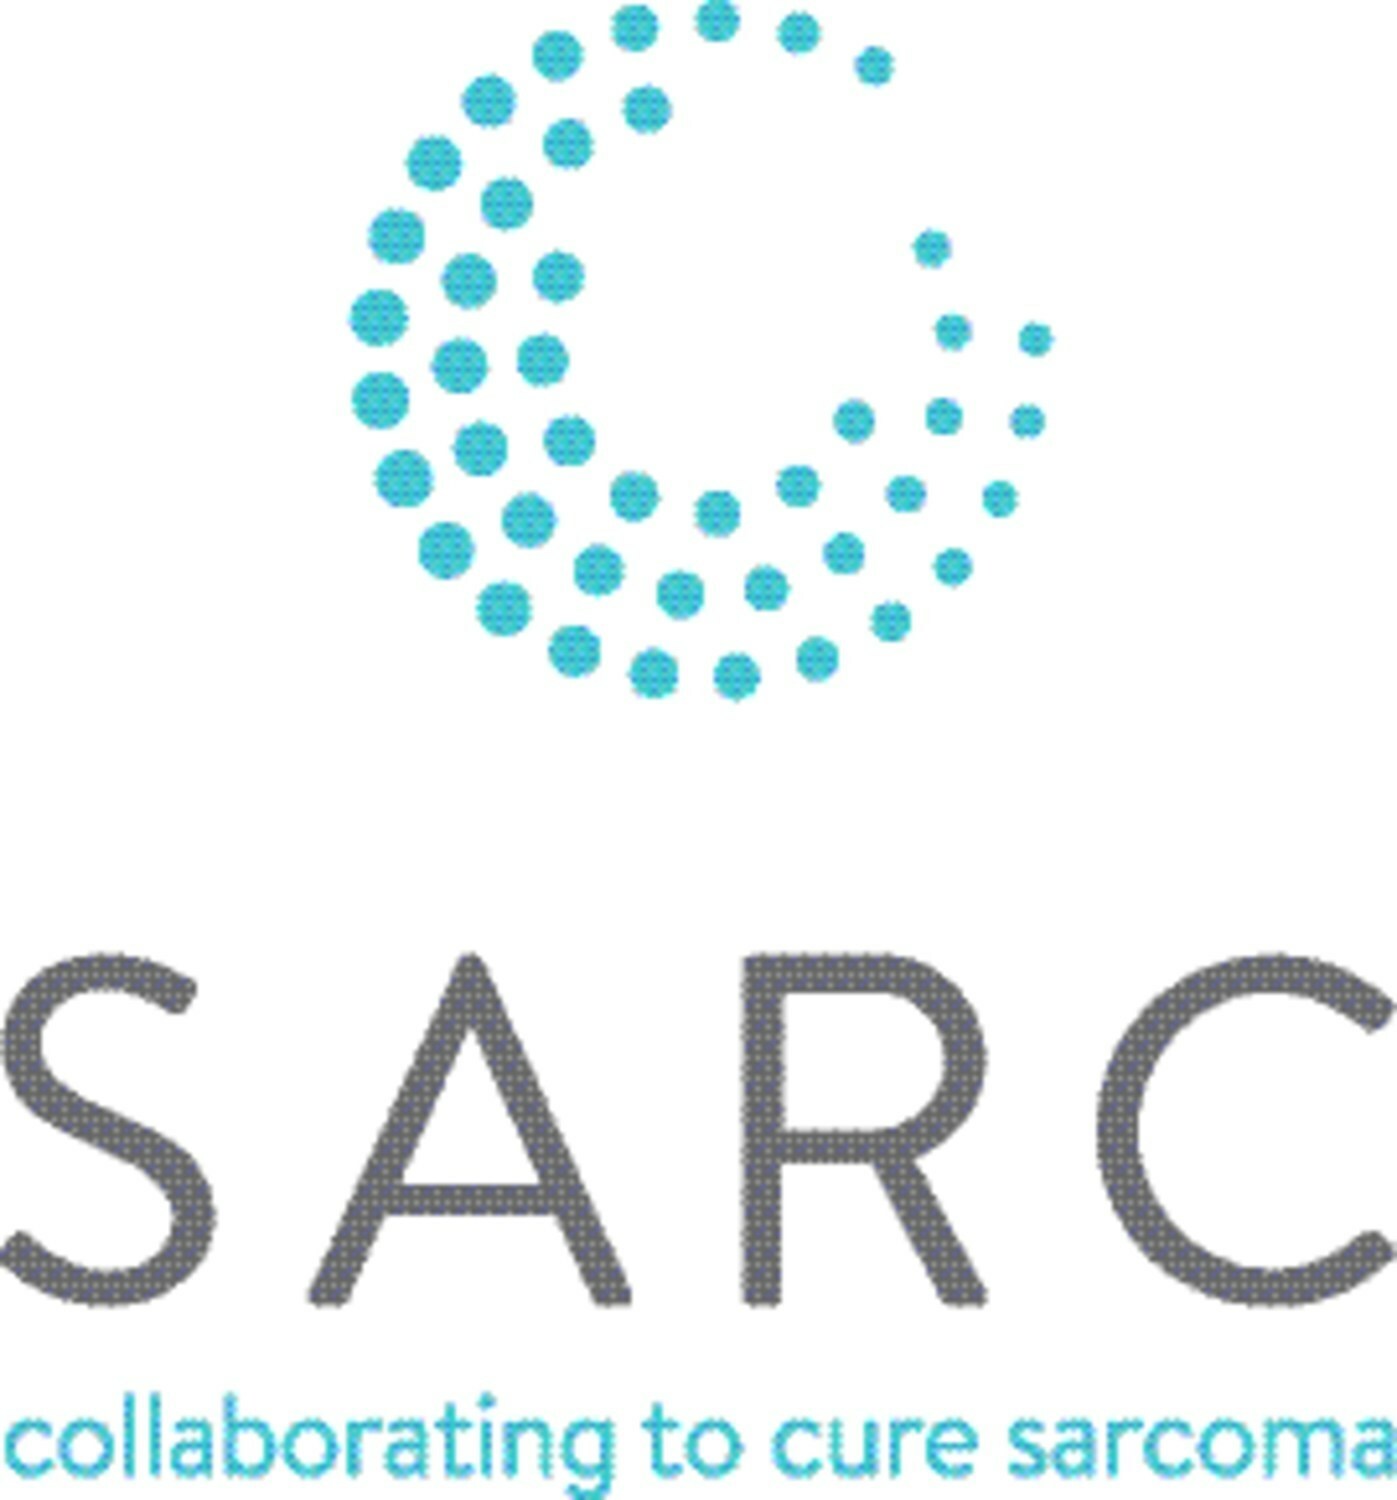 SARC LAUNCHES GLOBAL SARCOMA CENTERS REGISTRY SUPPORTING PATIENT AND CLINICIAN ACCESS TO PROGRAMS EXPERT IN THE DIAGNOSIS AND TREATMENT OF SARCOMA (RARE AND ULTRARARE CANCER TYPES COMPRISING 15-20% OF CHILDHOOD CANCERS AND 1% OF ADULT CANCERS)